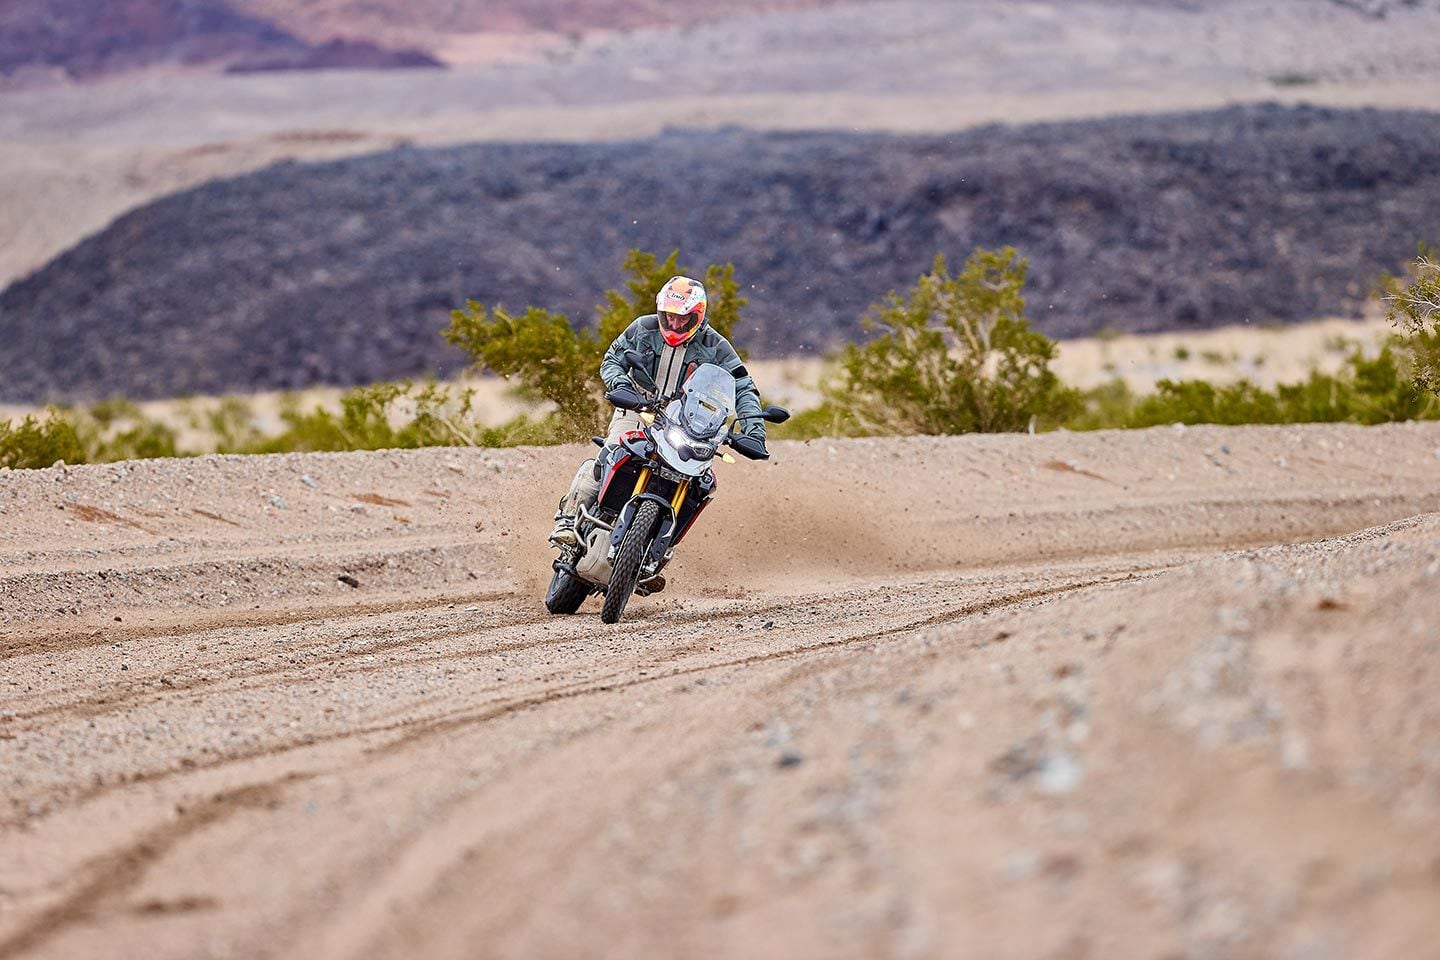 Six-time AMA champion Jeff Stanton steering with the rear on his Triumph Tiger 900 Rally Pro.